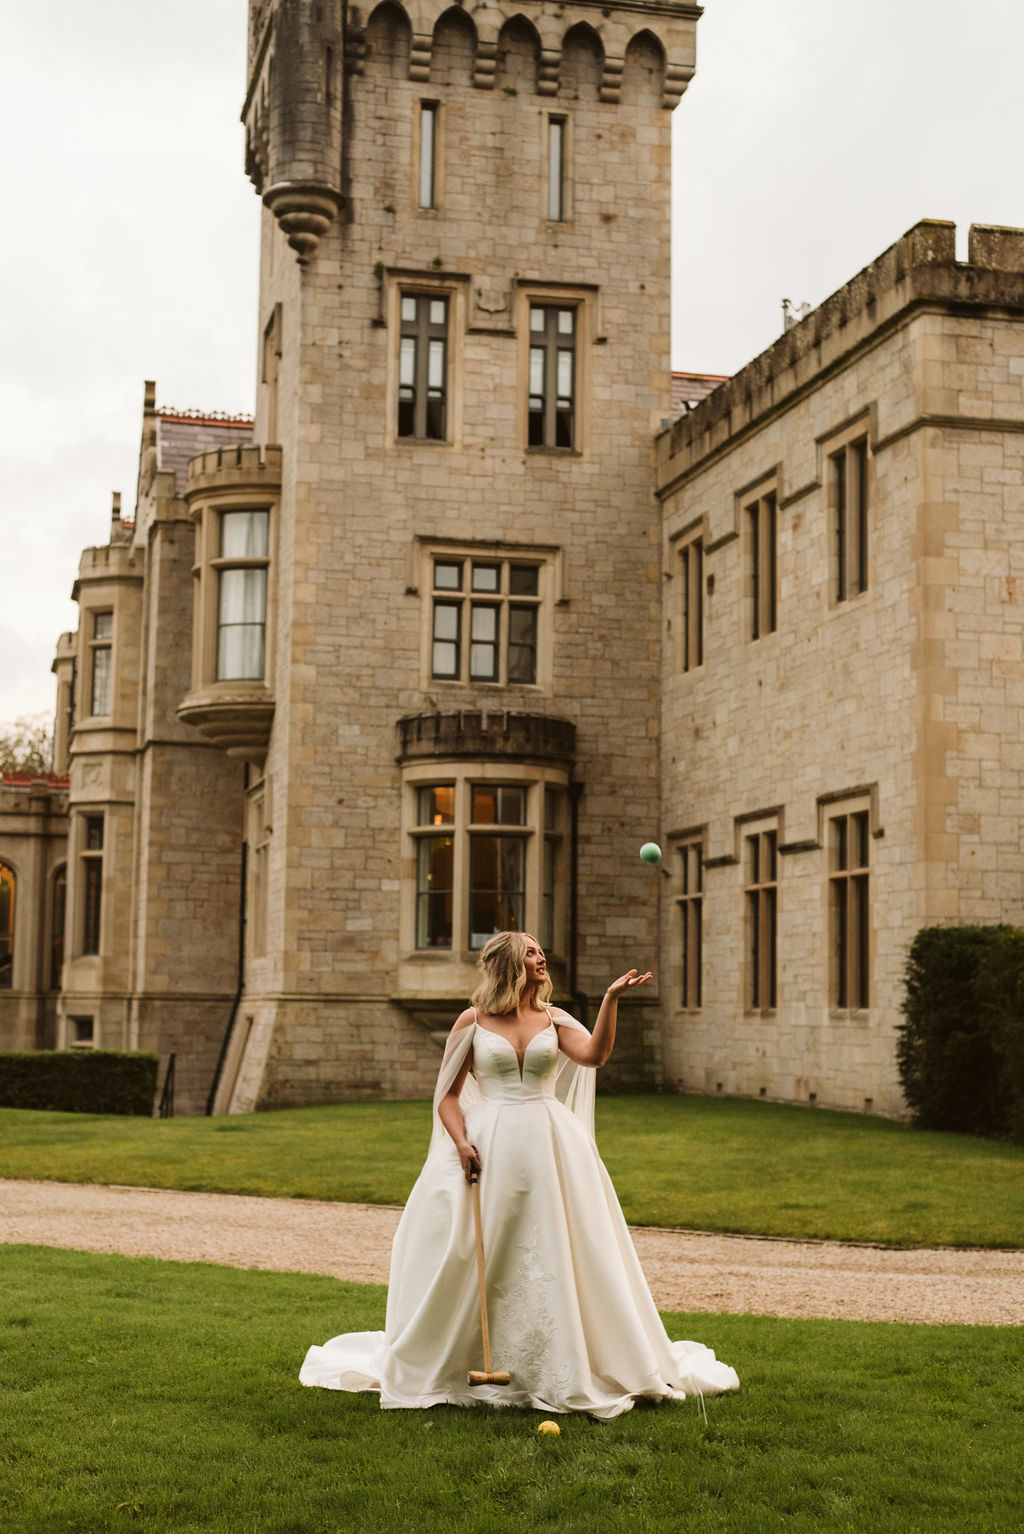 Bride wearing a mikado ballgown wedding dress with straps and tulle cape playing croquet in front of Lough Eske castle in Donegal, Ireland.